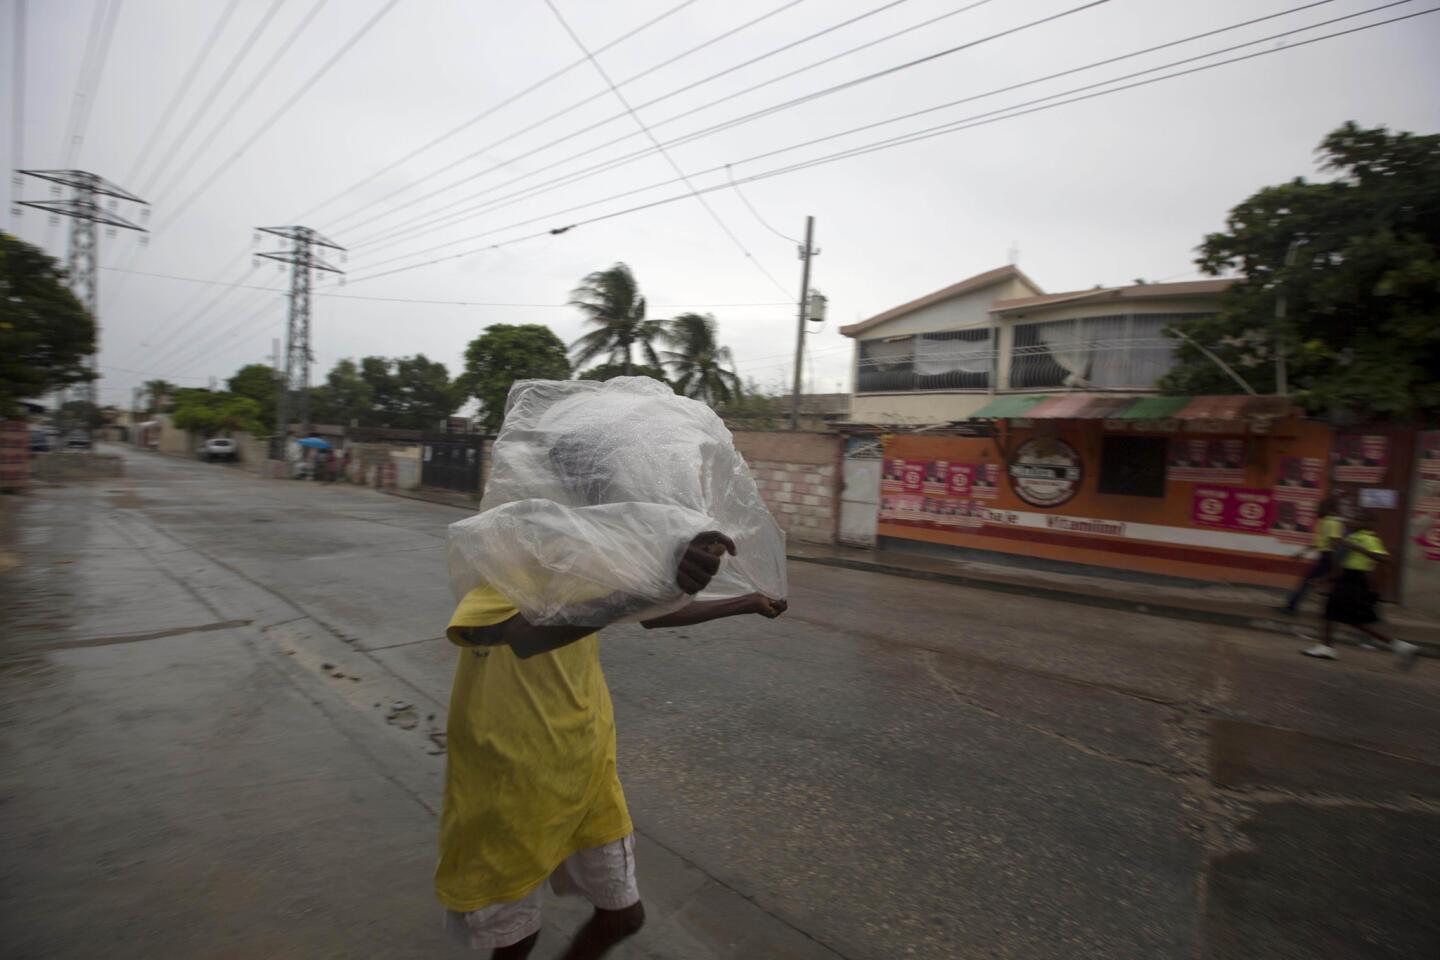 A man crosses a street using a garbage bag as protection from a light rain in Port-au-Prince, Haiti, on Oct. 3, 2016.